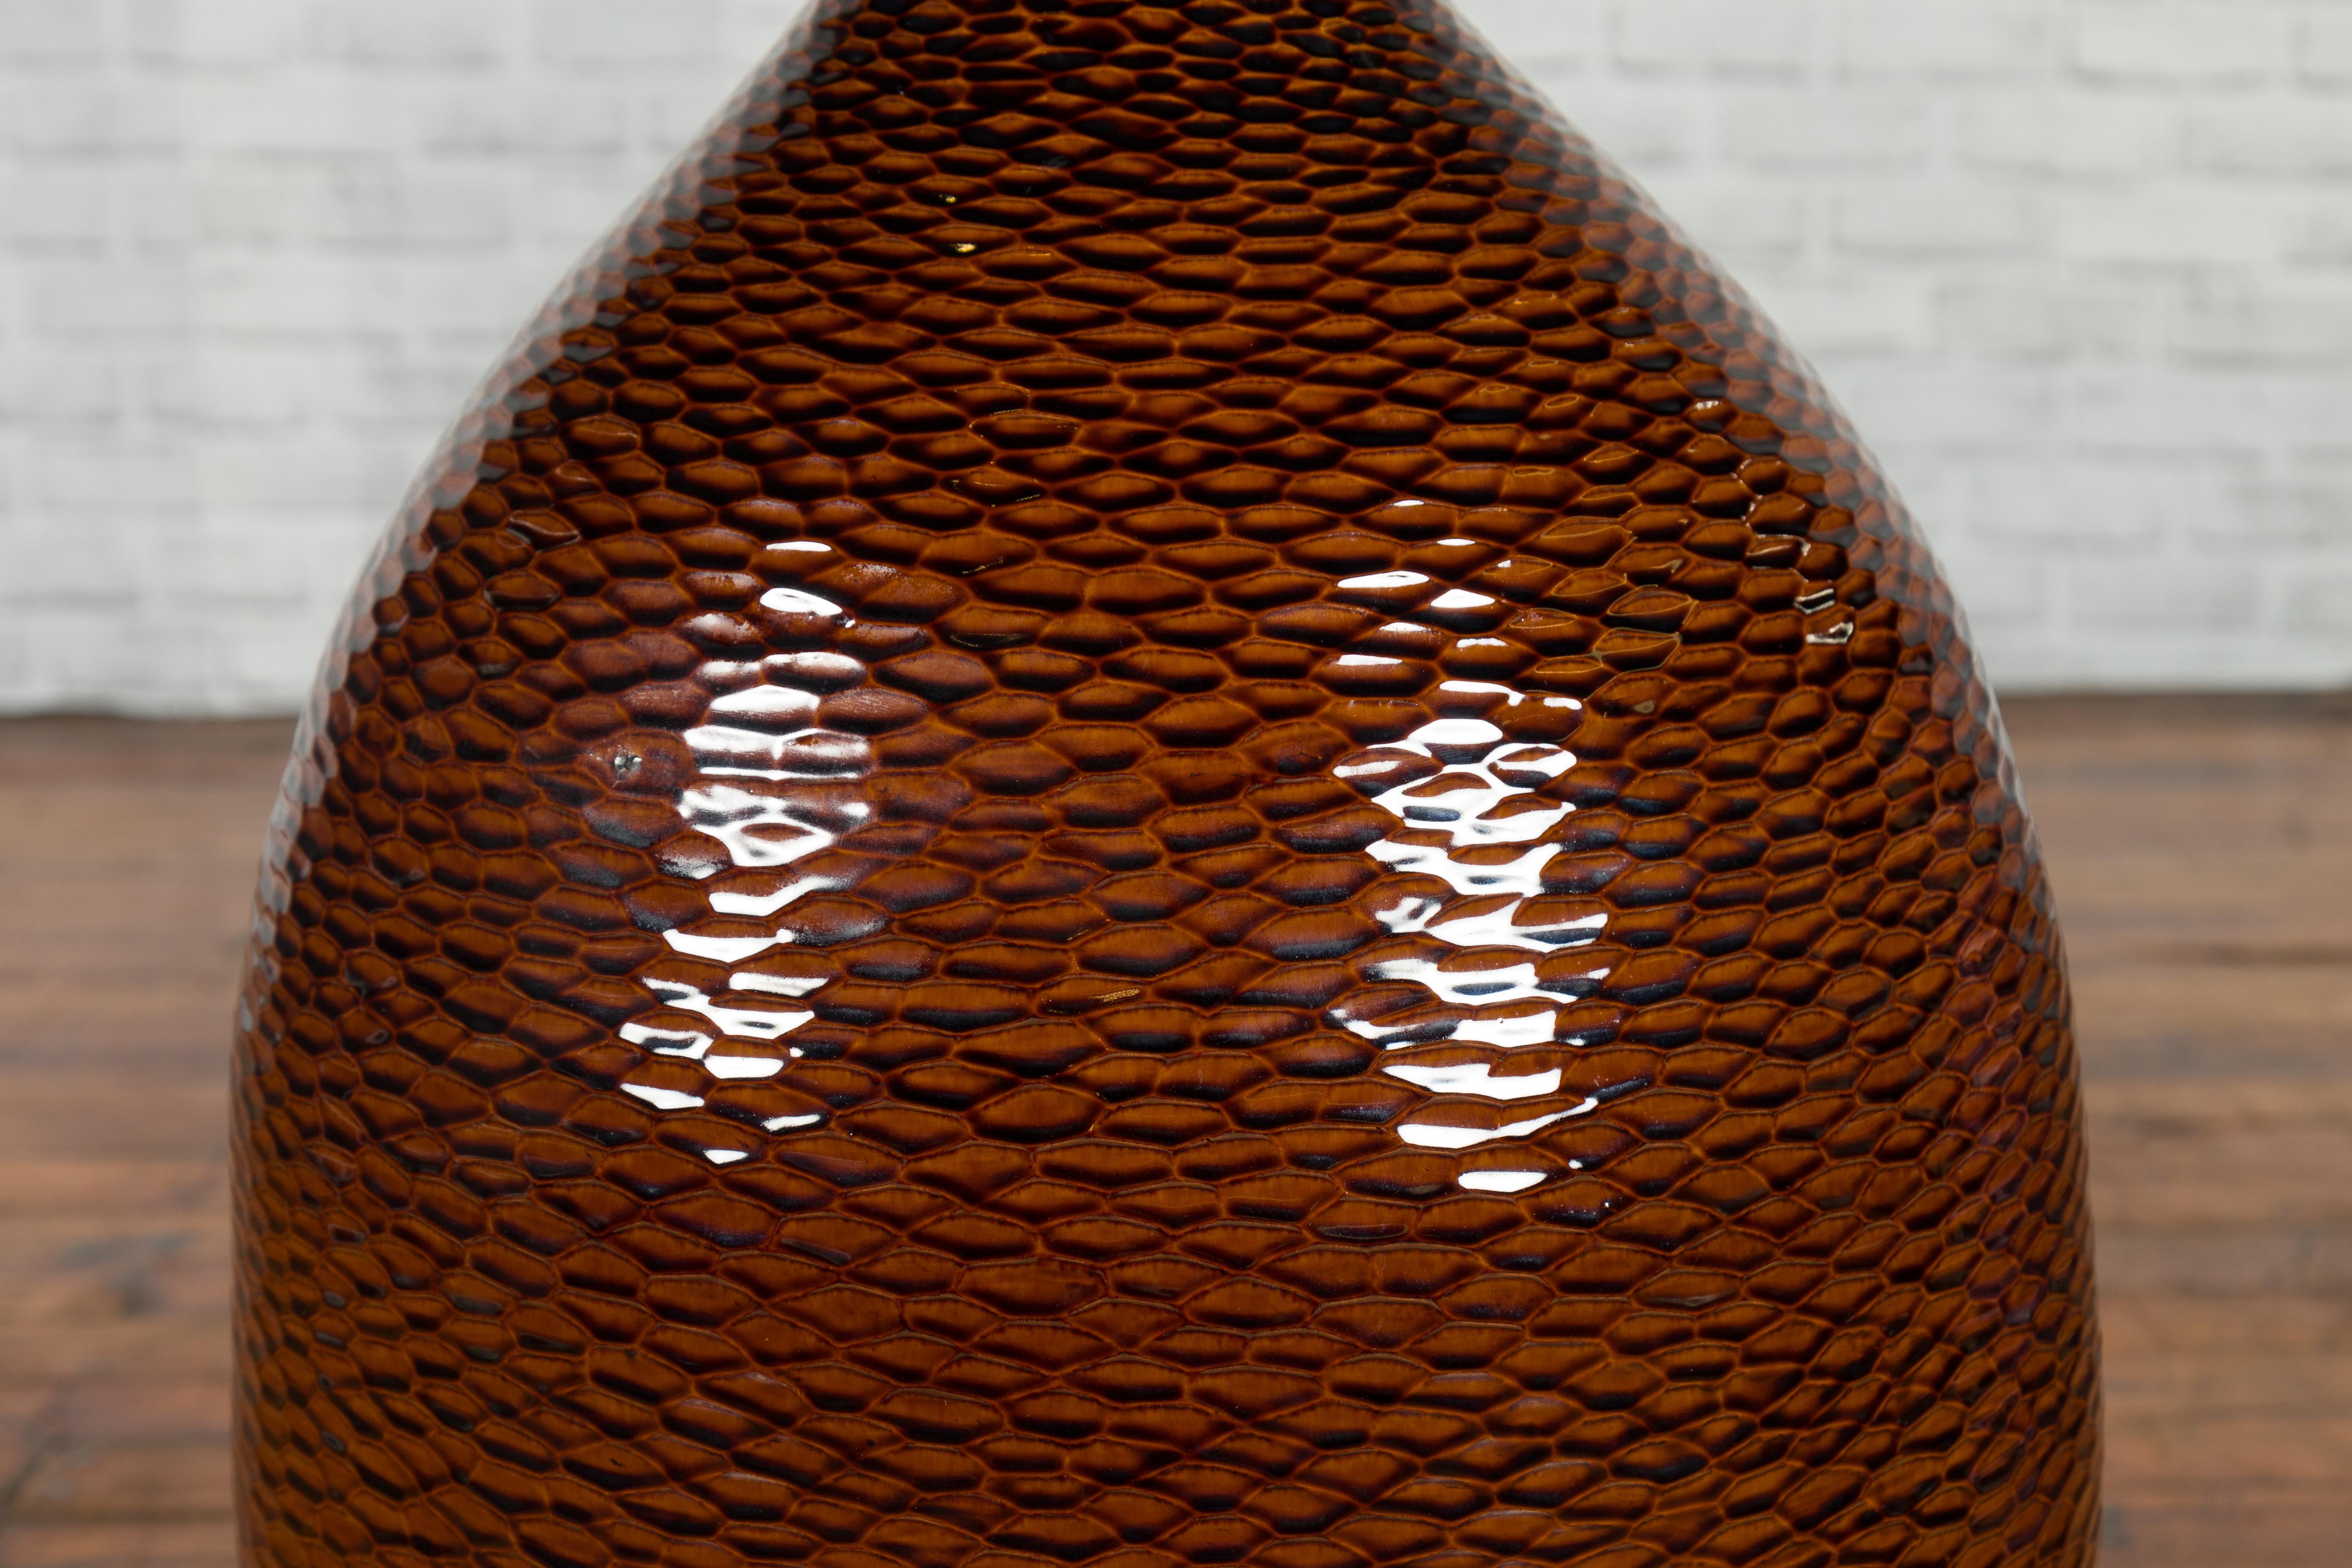 20th Century Thai Chiang Mai Brown Textured Teardrop Shaped Vase from the Prem Collection For Sale